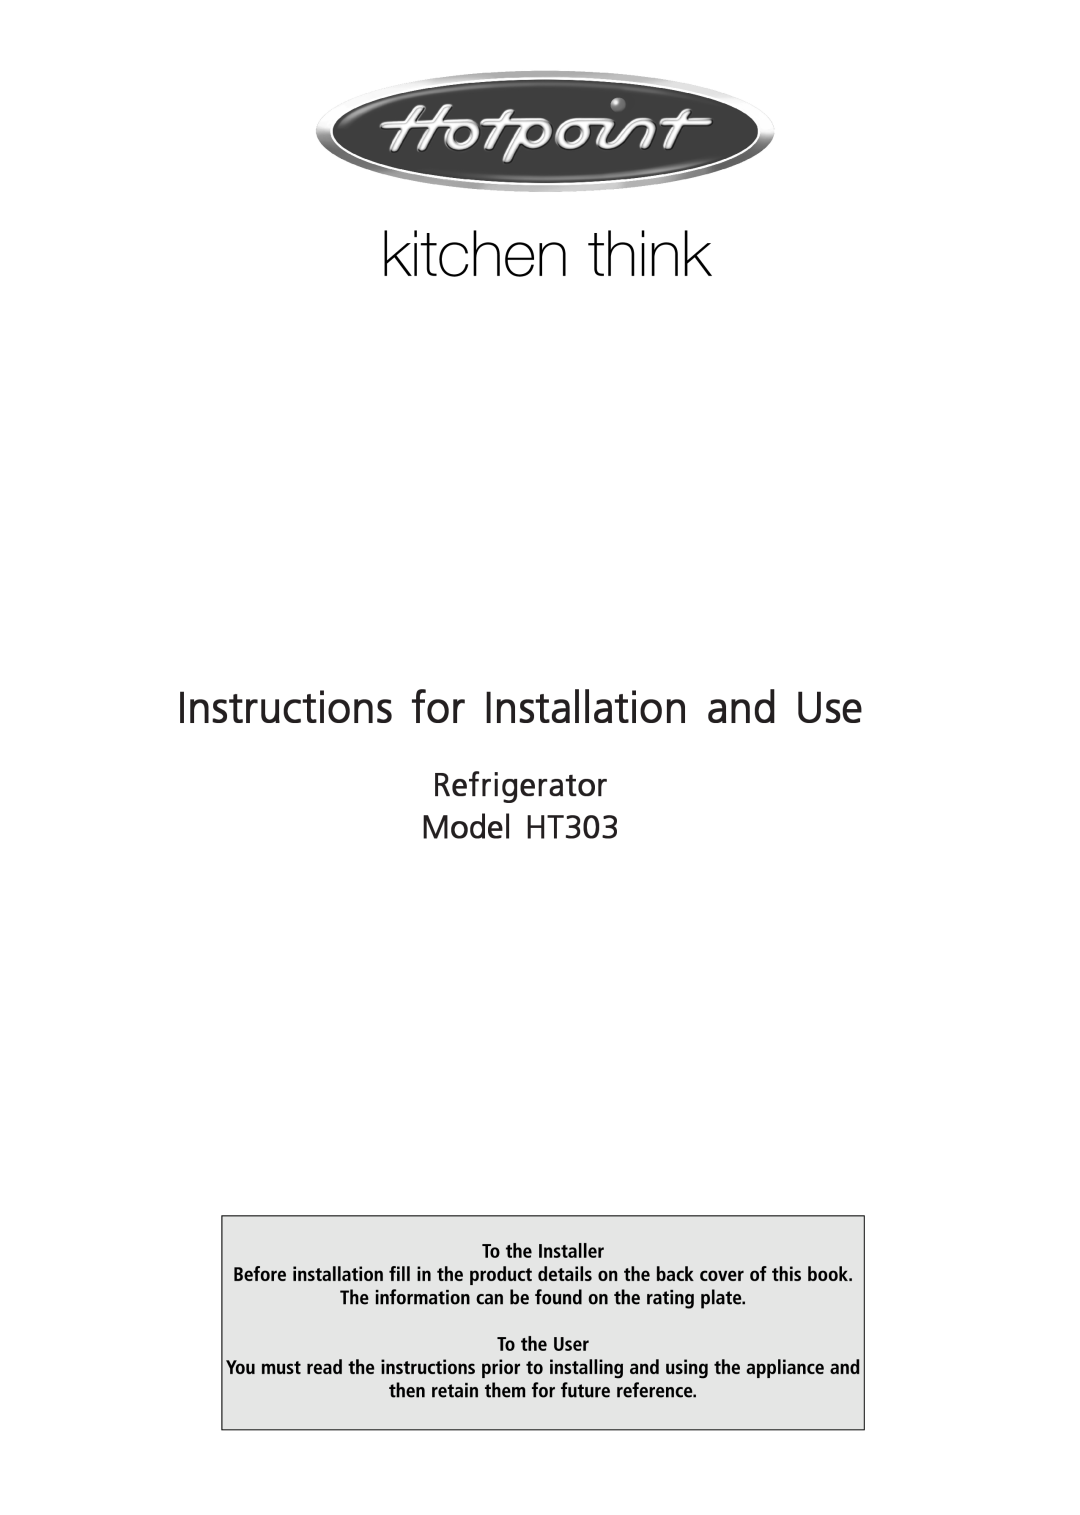 Hotpoint manual Refrigerator Model HT303, Instructions for Installation and Use 